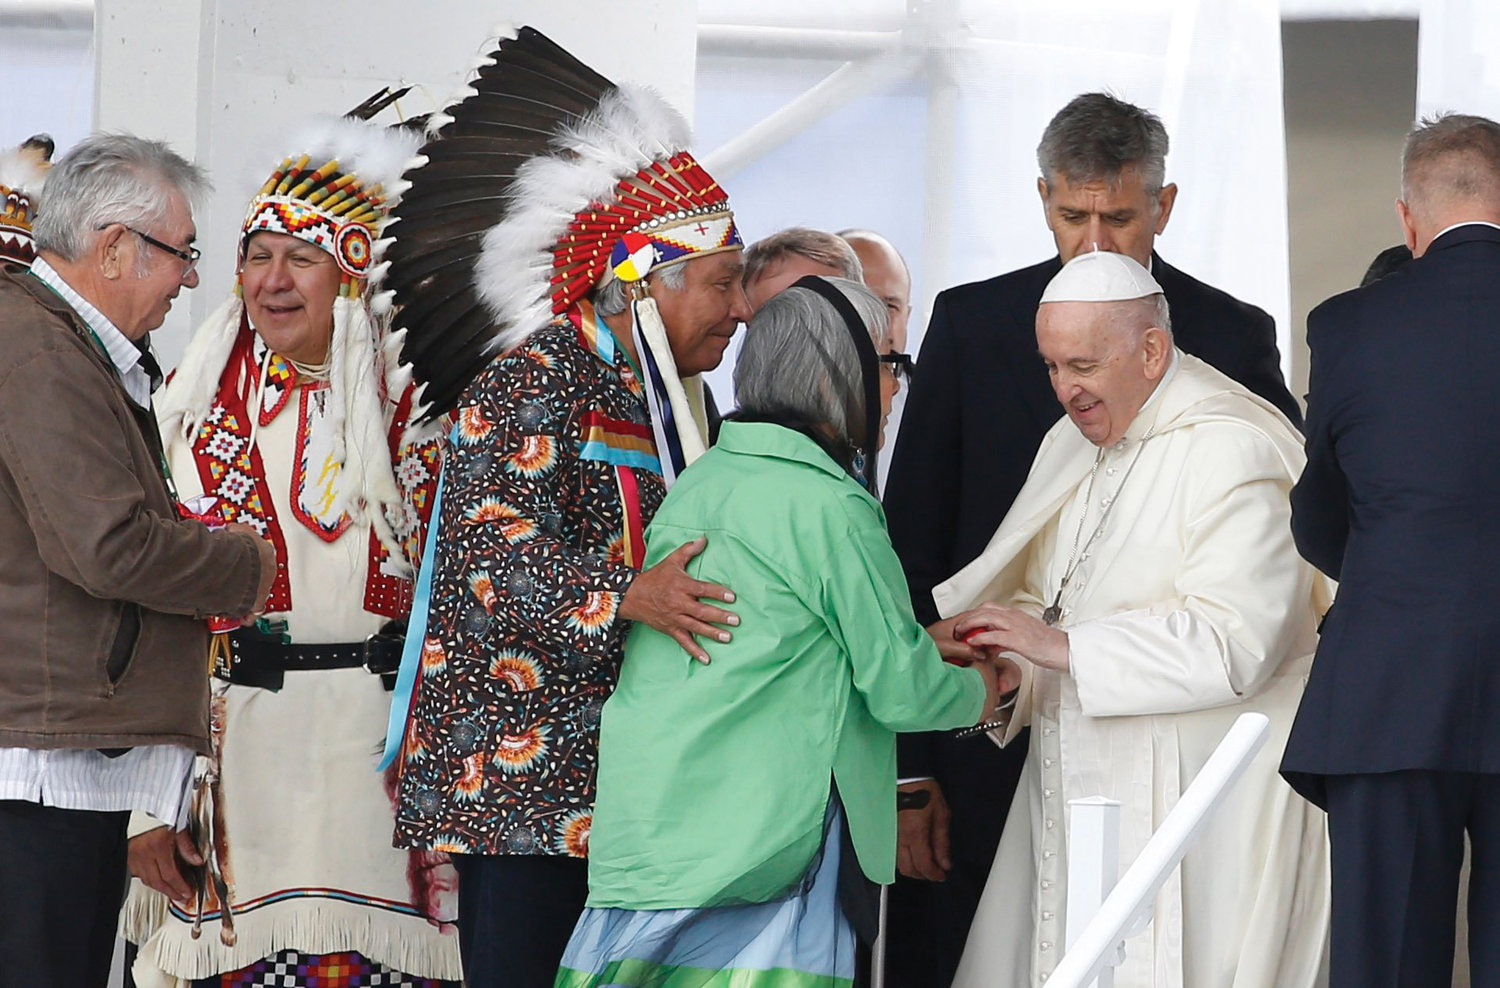 POPE’S PRESENCE—Pope Francis greets a woman during a meeting with First Nations, Métis and Inuit communities at Maskwacis, Alberta, July 25.